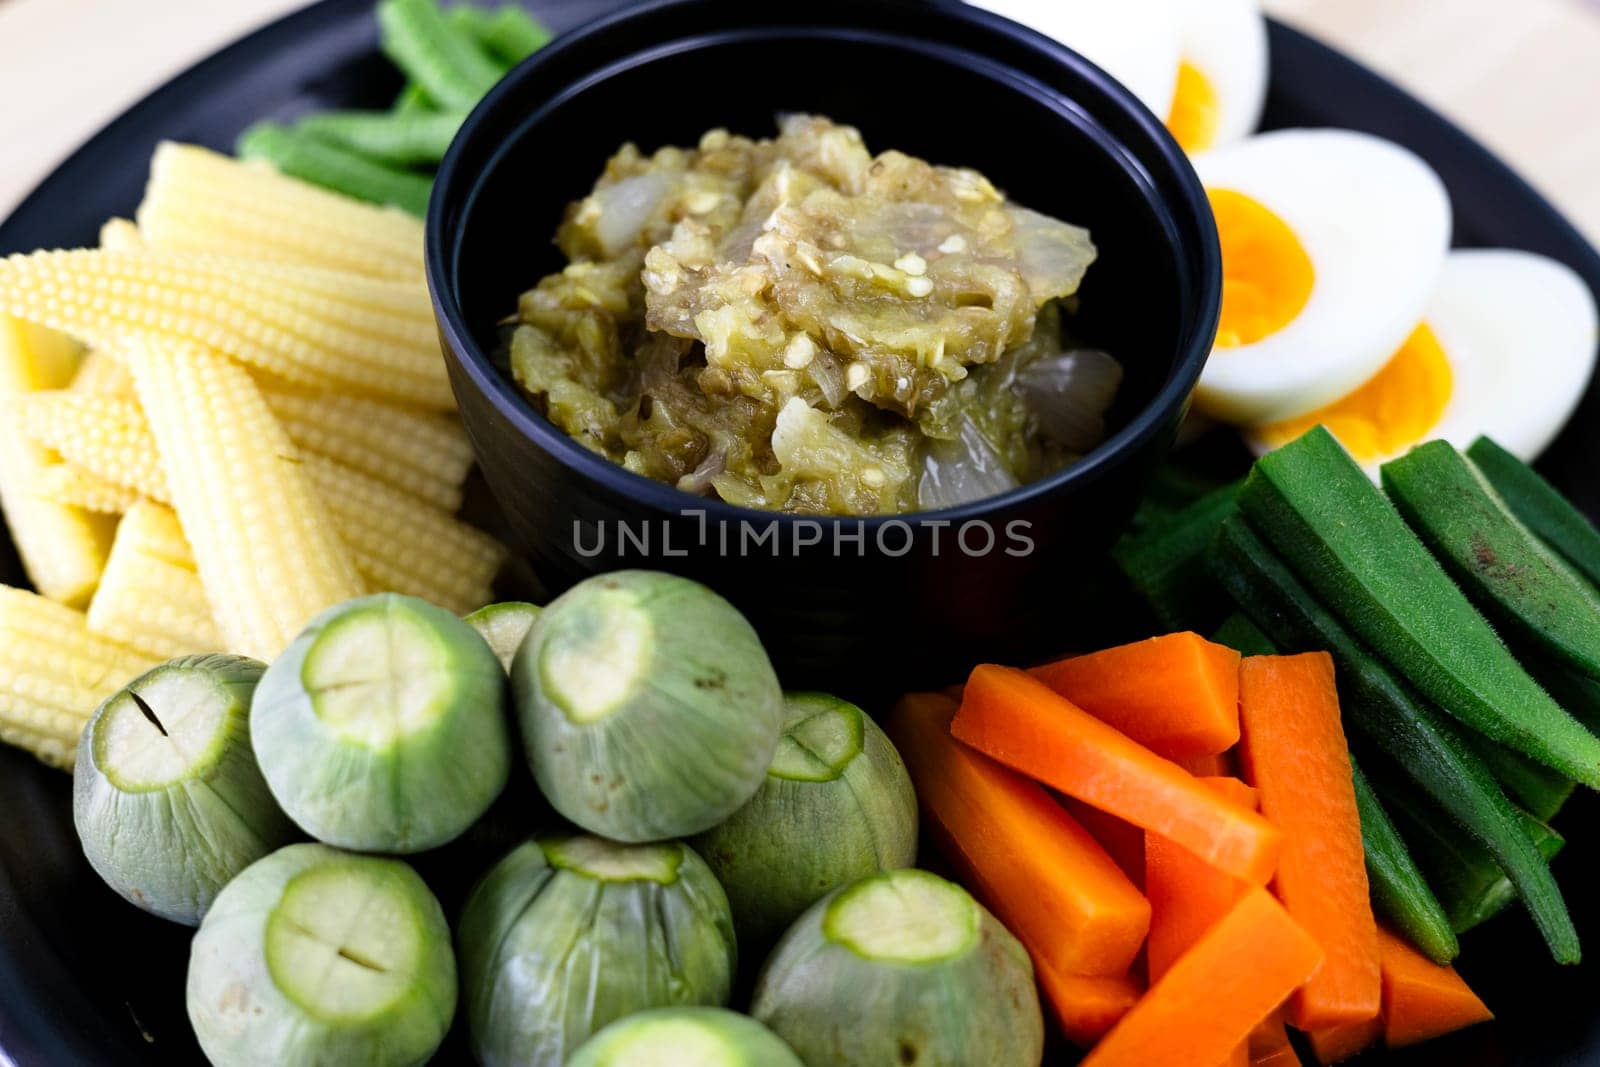 Chili paste made from fish and boiled vegetables. Authentic Traditional Thai food.